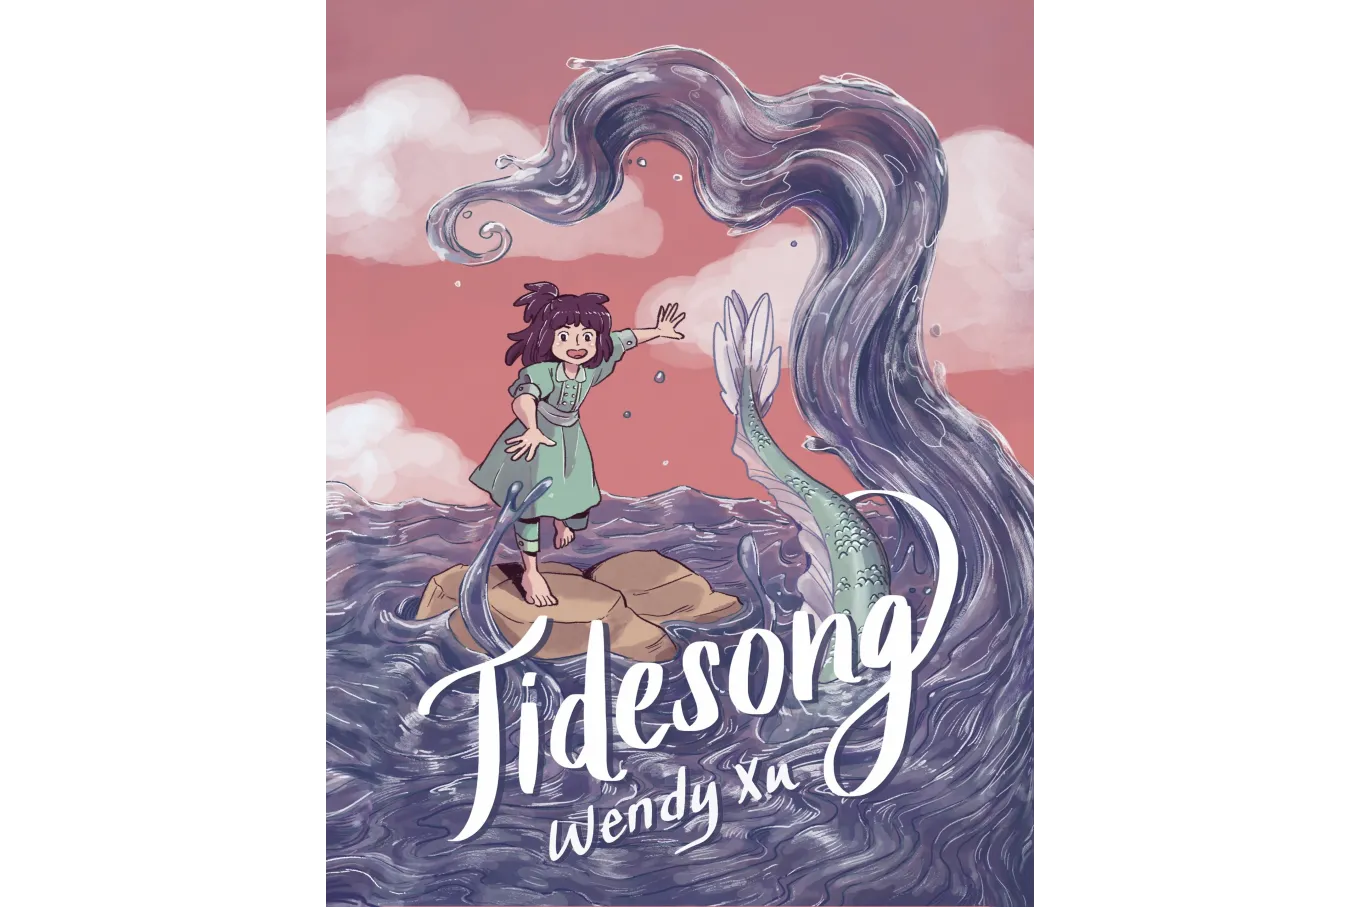 Cover of Tidesong